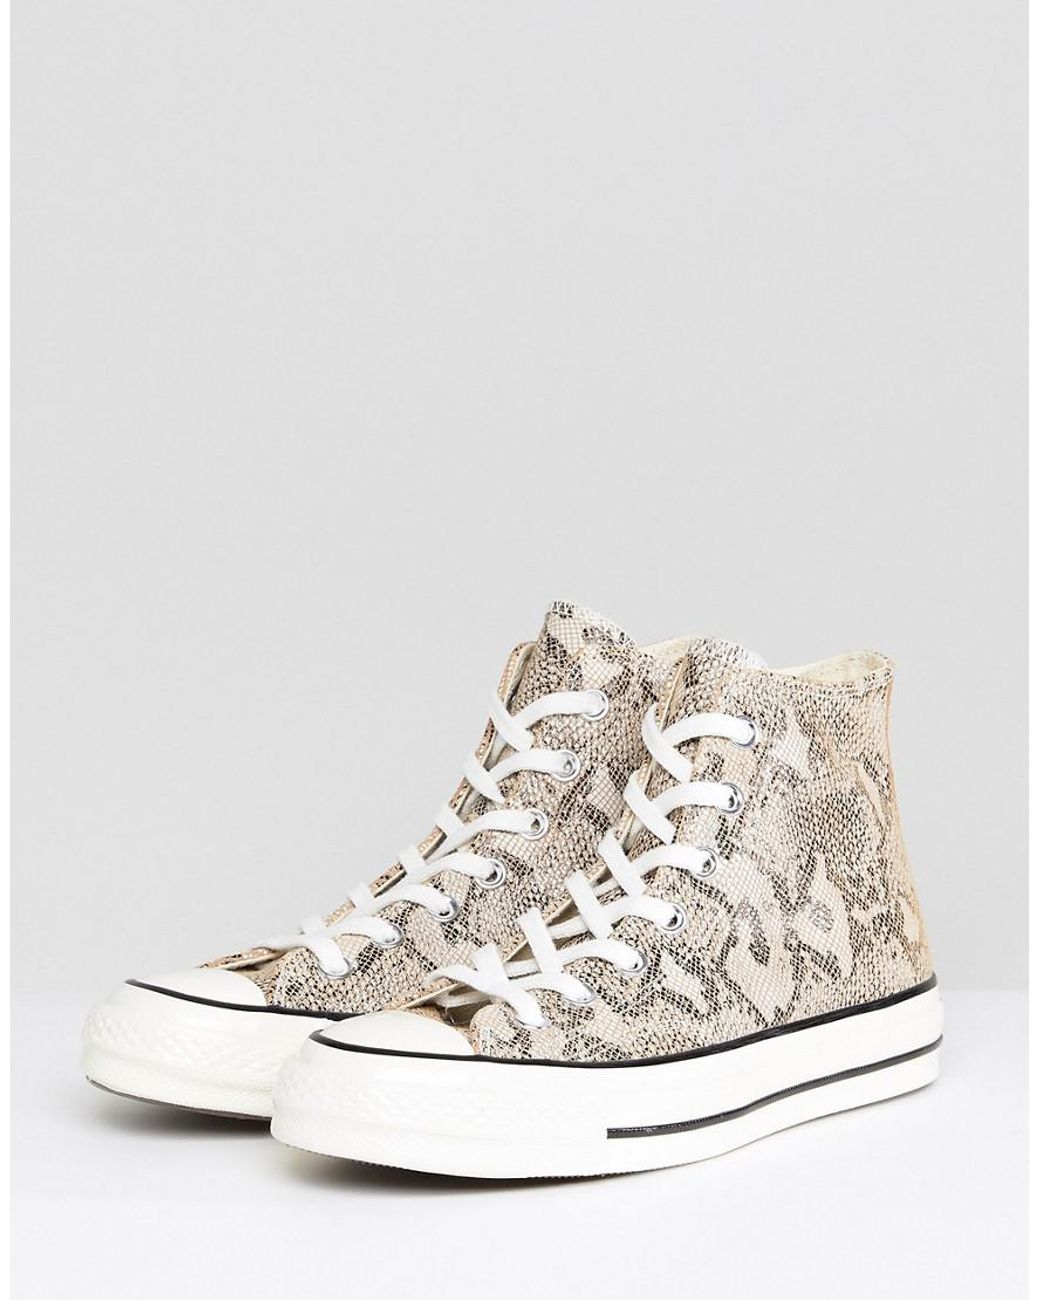 Converse Chuck Taylor All Star '70 High Top Sneakers In Snake Print | Lyst